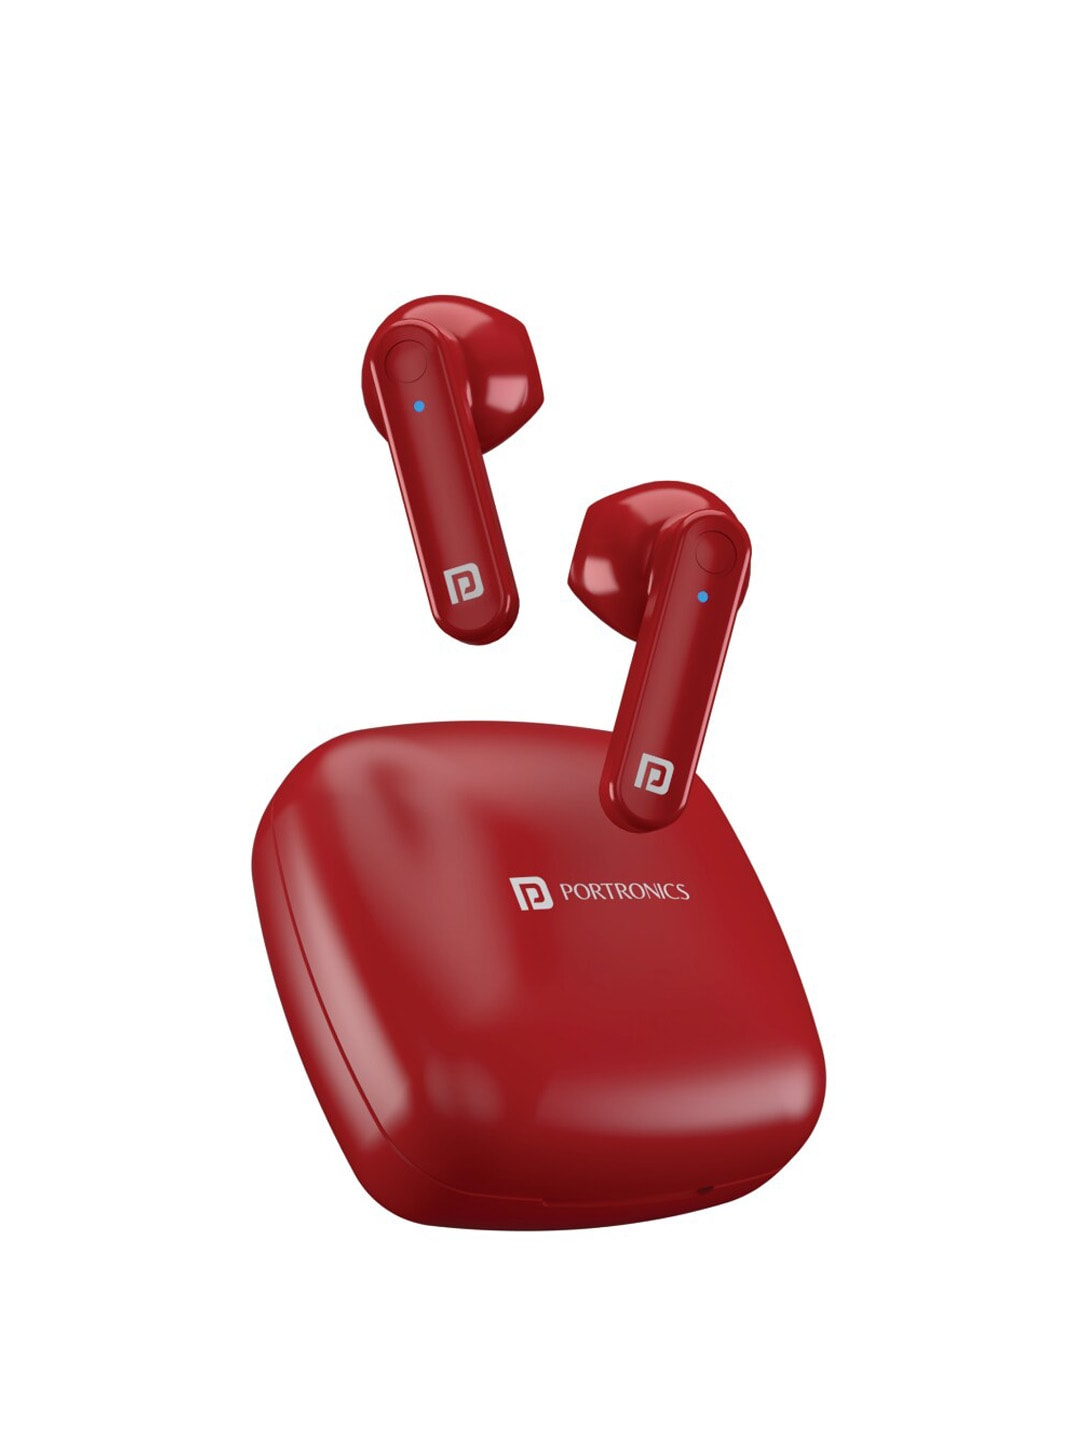 Portronics Adults Maroon Harmonics Twins S2 Wireless Sports Earbuds, 20 Hrs Playtime Price in India